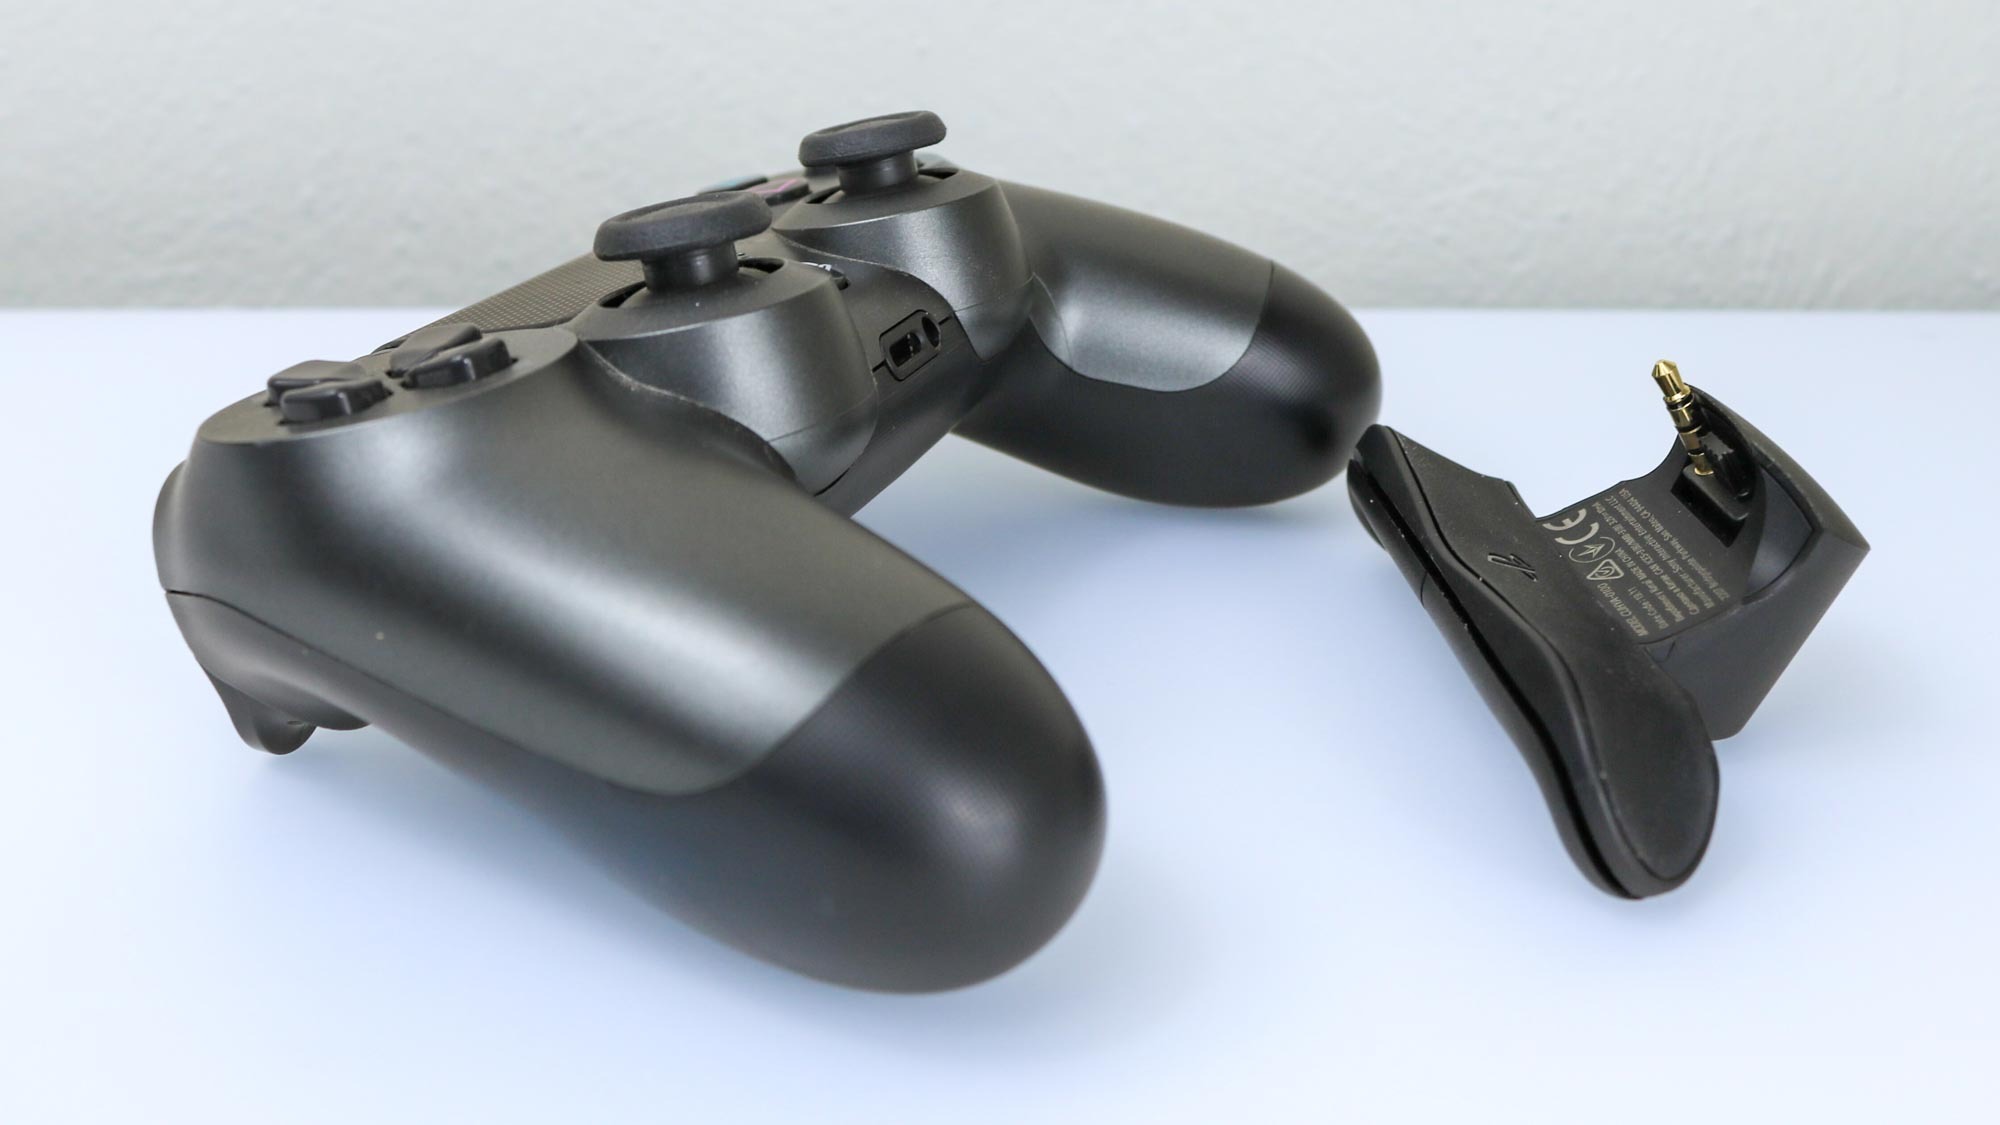 The DualShock 4 Back Button Attachment next to a DualShock 4 controller